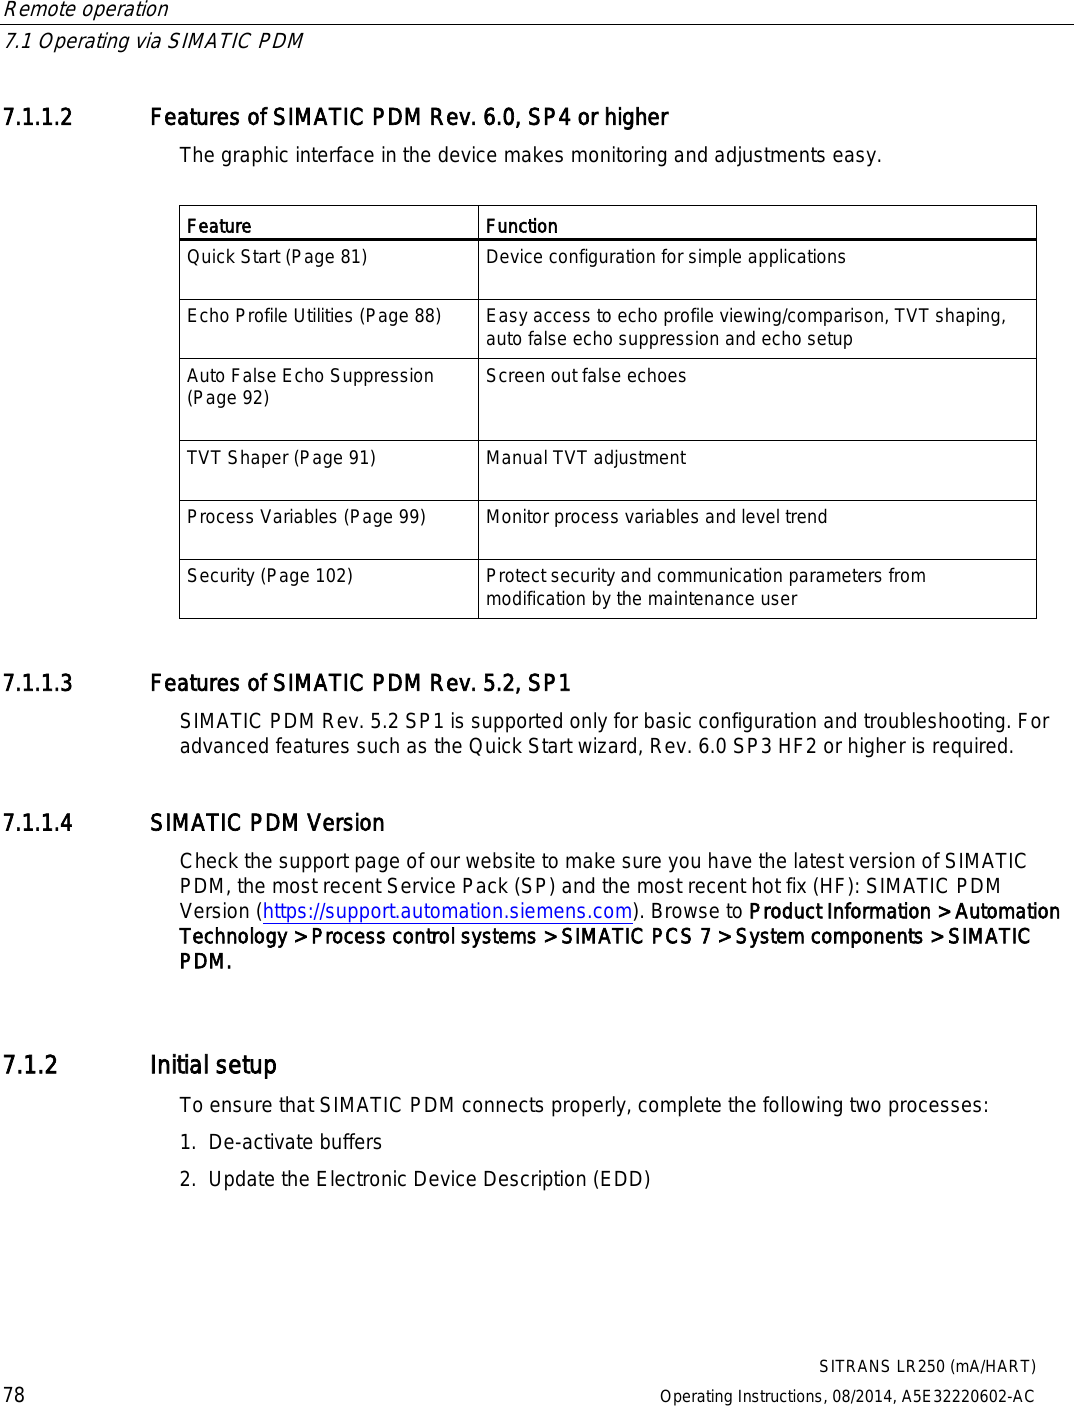 Remote operation   7.1 Operating via SIMATIC PDM  SITRANS LR250 (mA/HART) 78 Operating Instructions, 08/2014, A5E32220602-AC 7.1.1.2 Features of SIMATIC PDM Rev. 6.0, SP4 or higher The graphic interface in the device makes monitoring and adjustments easy.  Feature Function Quick Start (Page 81)  Device configuration for simple applications Echo Profile Utilities (Page 88)  Easy access to echo profile viewing/comparison, TVT shaping, auto false echo suppression and echo setup Auto False Echo Suppression (Page 92)  Screen out false echoes TVT Shaper (Page 91)  Manual TVT adjustment Process Variables (Page 99)  Monitor process variables and level trend Security (Page 102)  Protect security and communication parameters from modification by the maintenance user 7.1.1.3 Features of SIMATIC PDM Rev. 5.2, SP1 SIMATIC PDM Rev. 5.2 SP1 is supported only for basic configuration and troubleshooting. For advanced features such as the Quick Start wizard, Rev. 6.0 SP3 HF2 or higher is required. 7.1.1.4 SIMATIC PDM Version Check the support page of our website to make sure you have the latest version of SIMATIC PDM, the most recent Service Pack (SP) and the most recent hot fix (HF): SIMATIC PDM Version (https://support.automation.siemens.com). Browse to Product Information &gt; Automation Technology &gt; Process control systems &gt; SIMATIC PCS 7 &gt; System components &gt; SIMATIC PDM. 7.1.2 Initial setup To ensure that SIMATIC PDM connects properly, complete the following two processes: 1. De-activate buffers 2. Update the Electronic Device Description (EDD) 